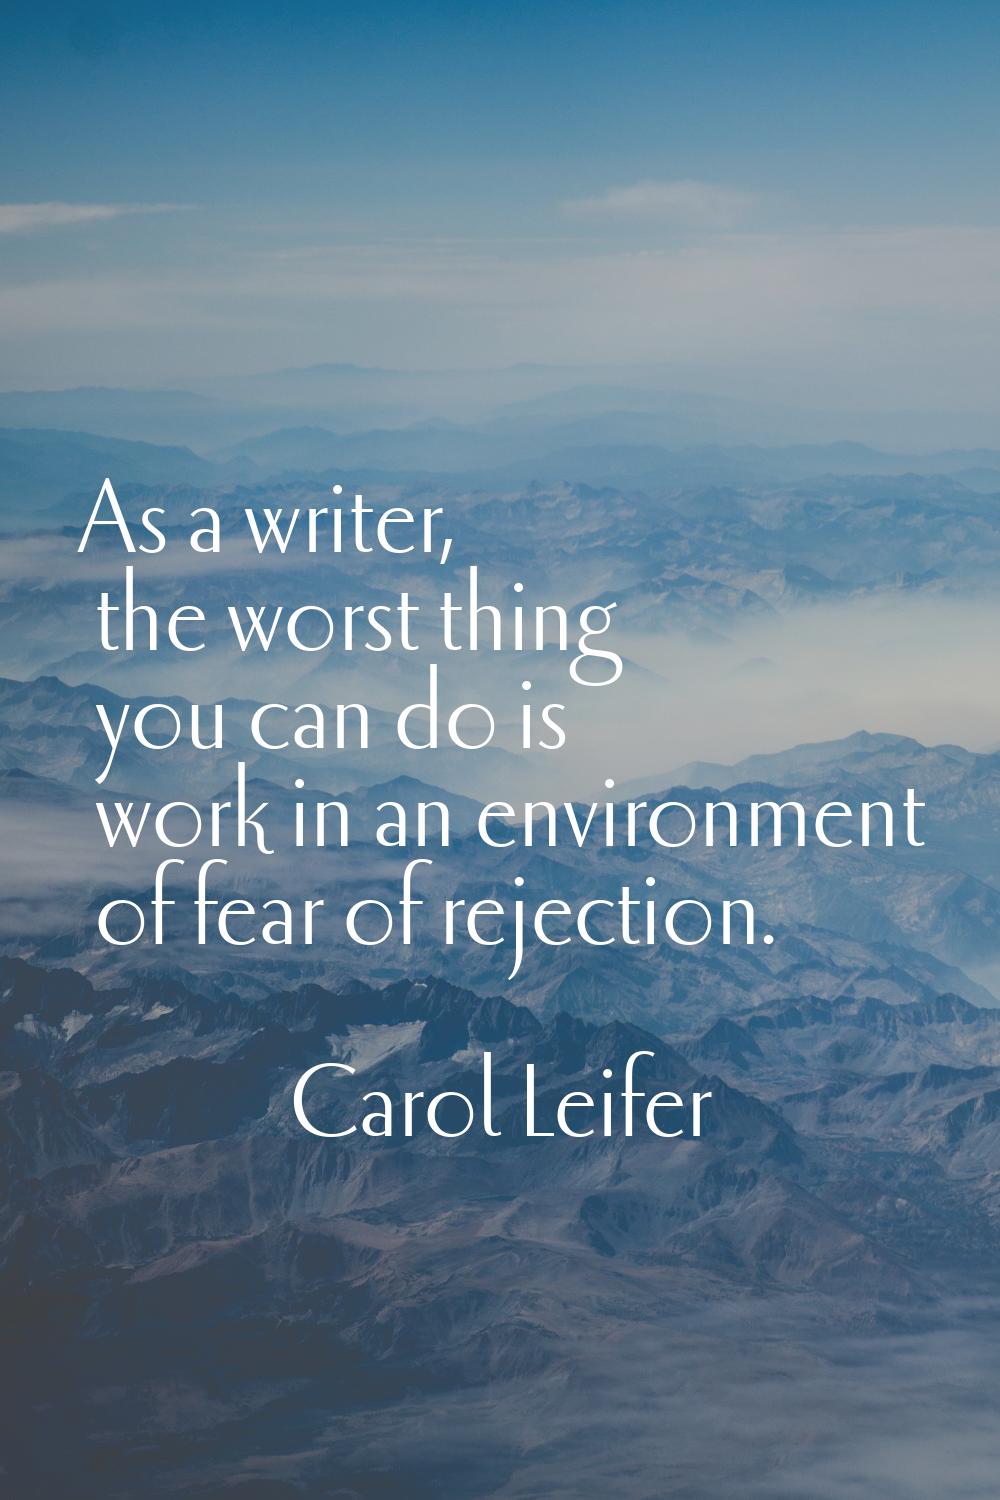 As a writer, the worst thing you can do is work in an environment of fear of rejection.